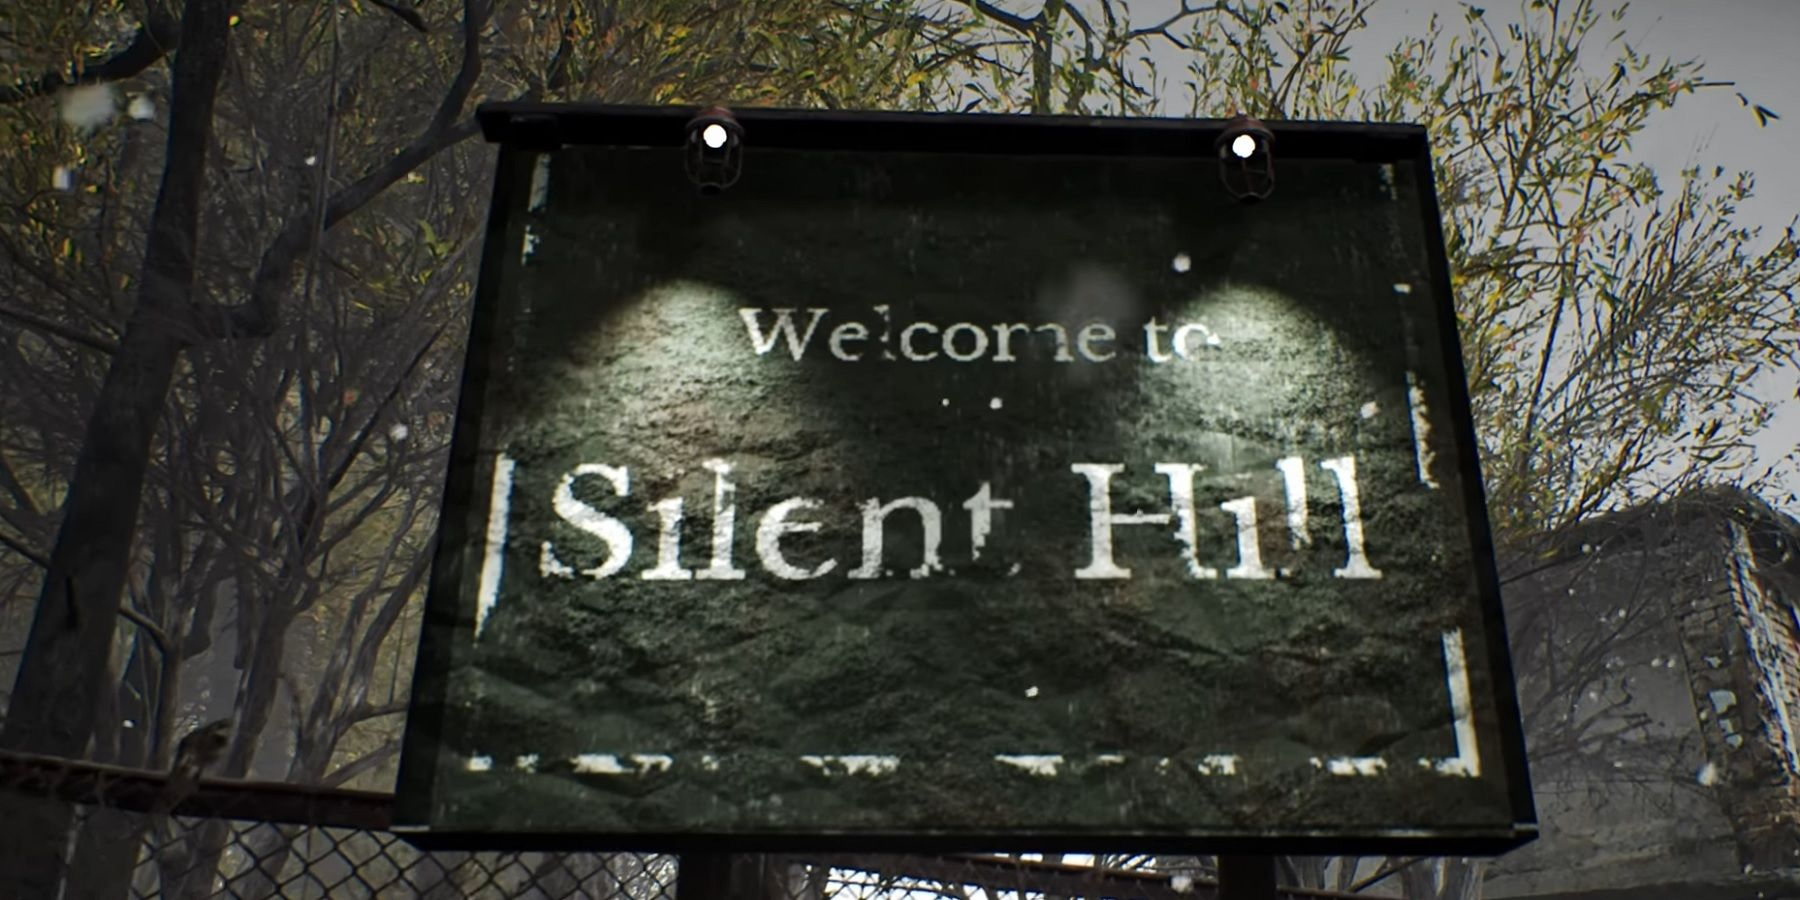 The "Welcome to Silent Hill" sign as reimiagined in Unreal Engine 5.